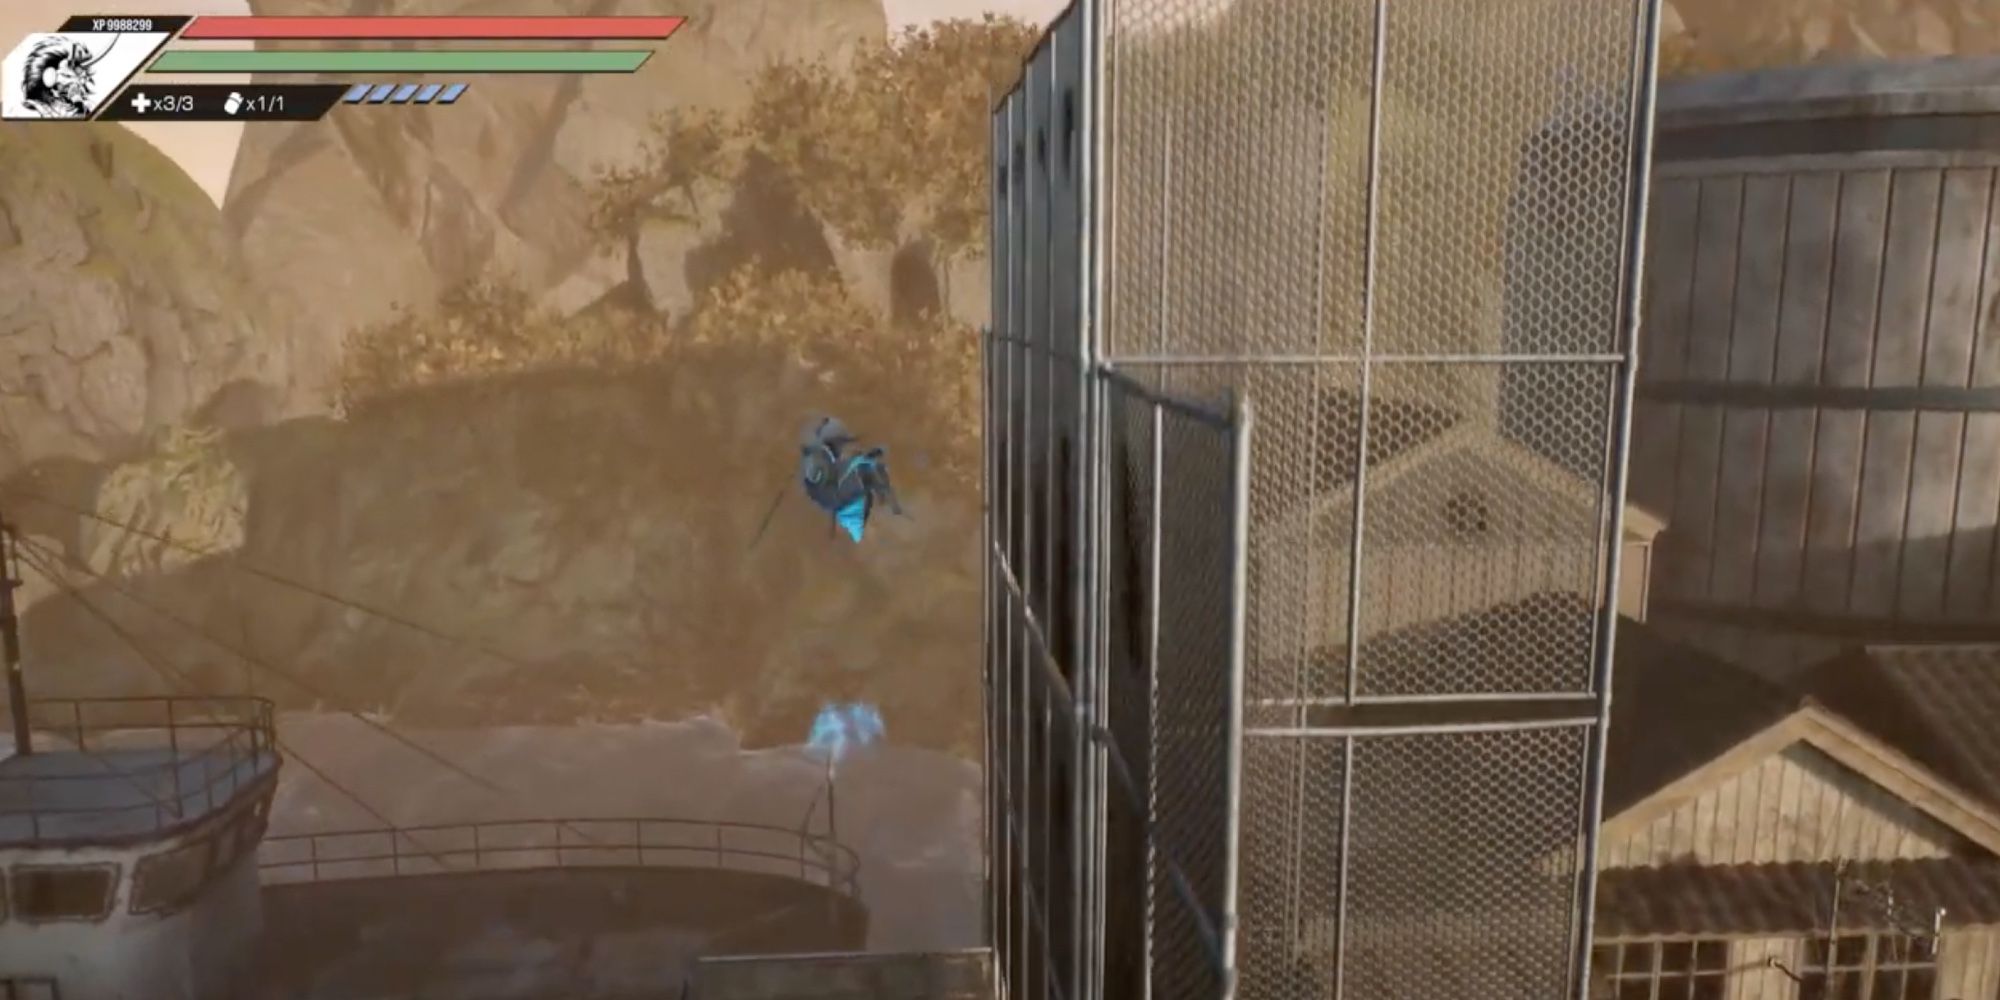 The player smashes through the metal structure using Stomp